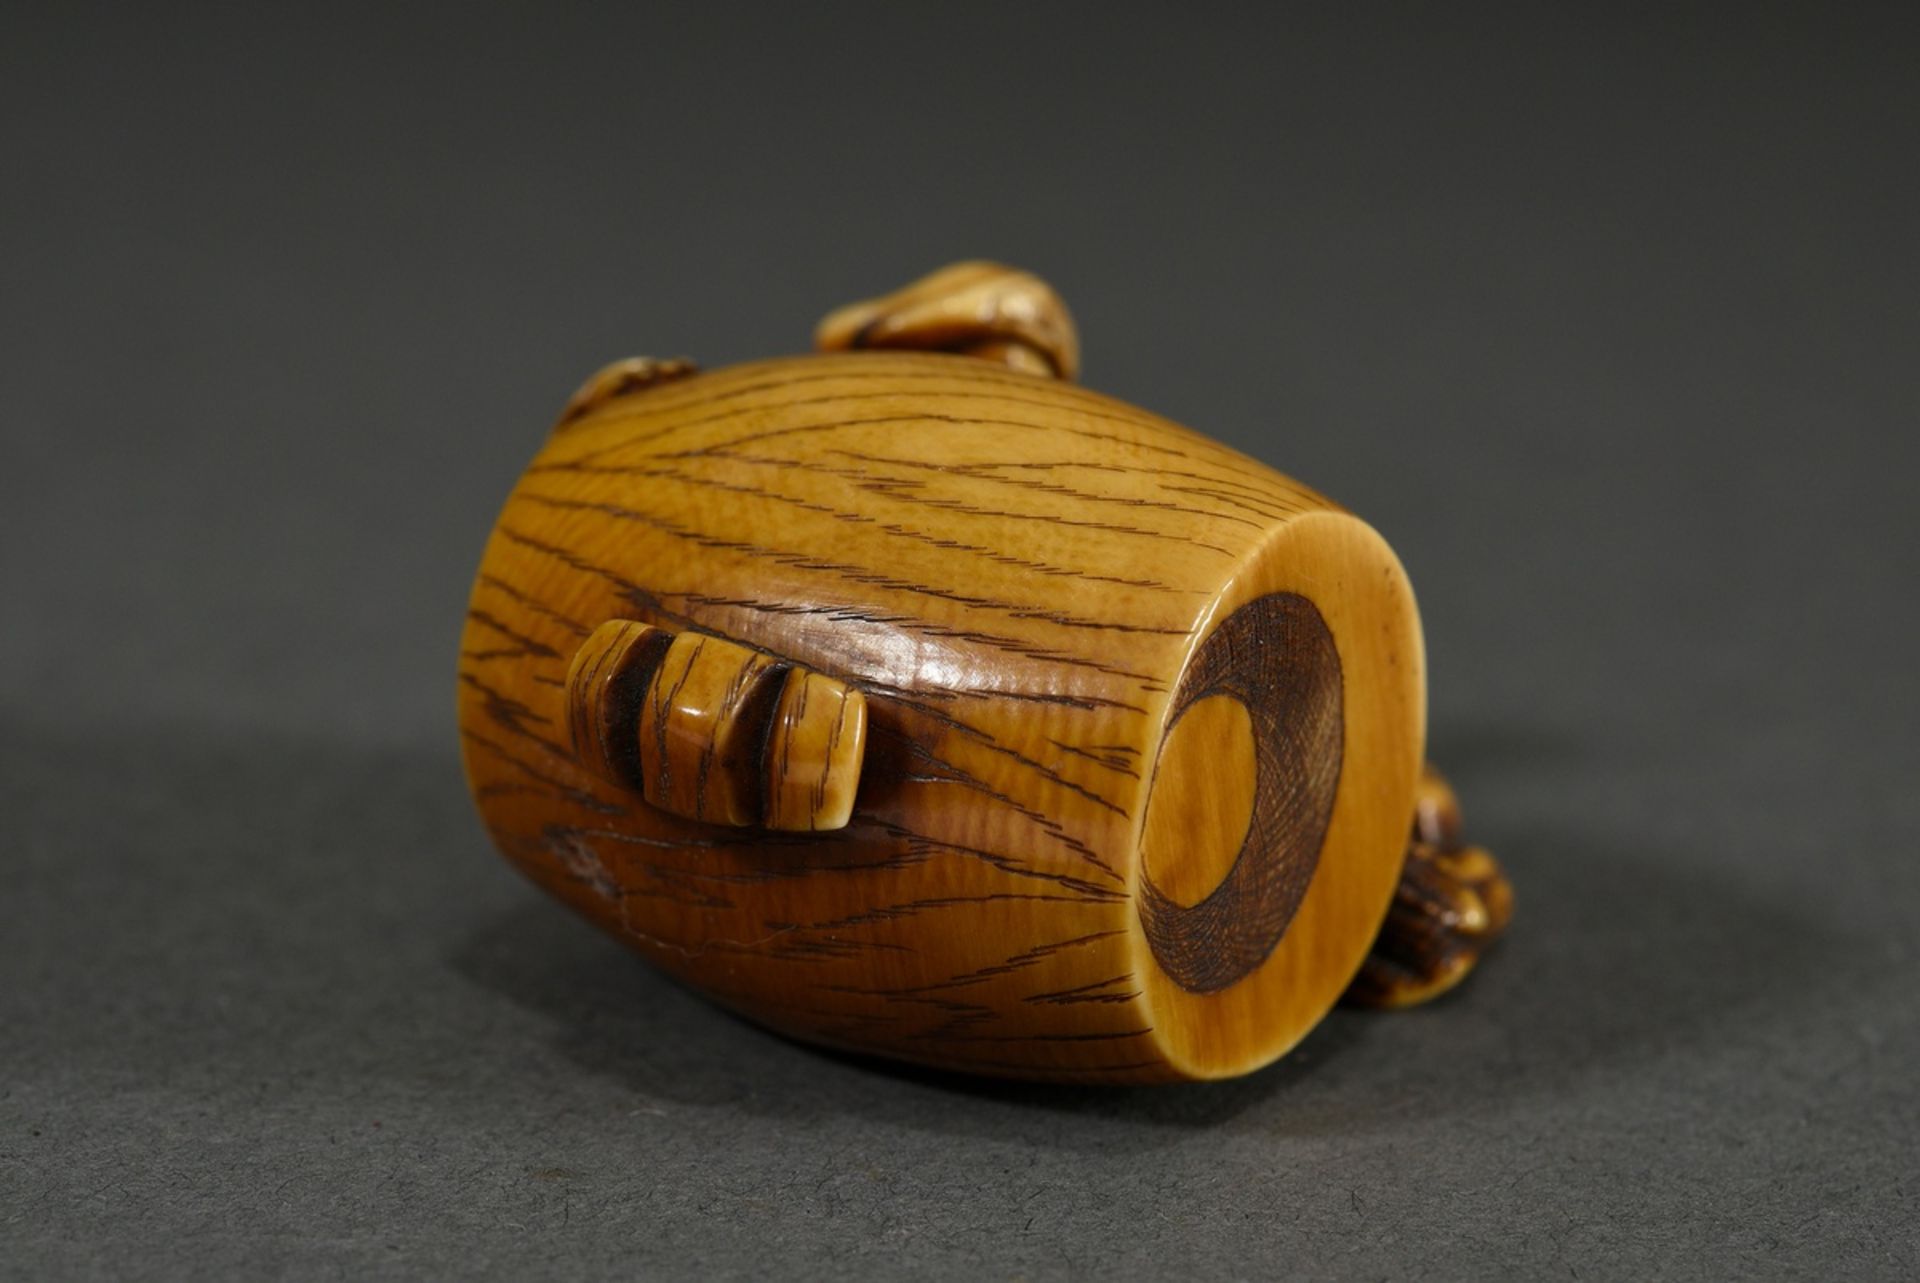 Ivory netsuke "Daikoku with huge rotten lucky hammer", patinated, incised signature, 4x5x2,5cm, per - Image 3 of 7